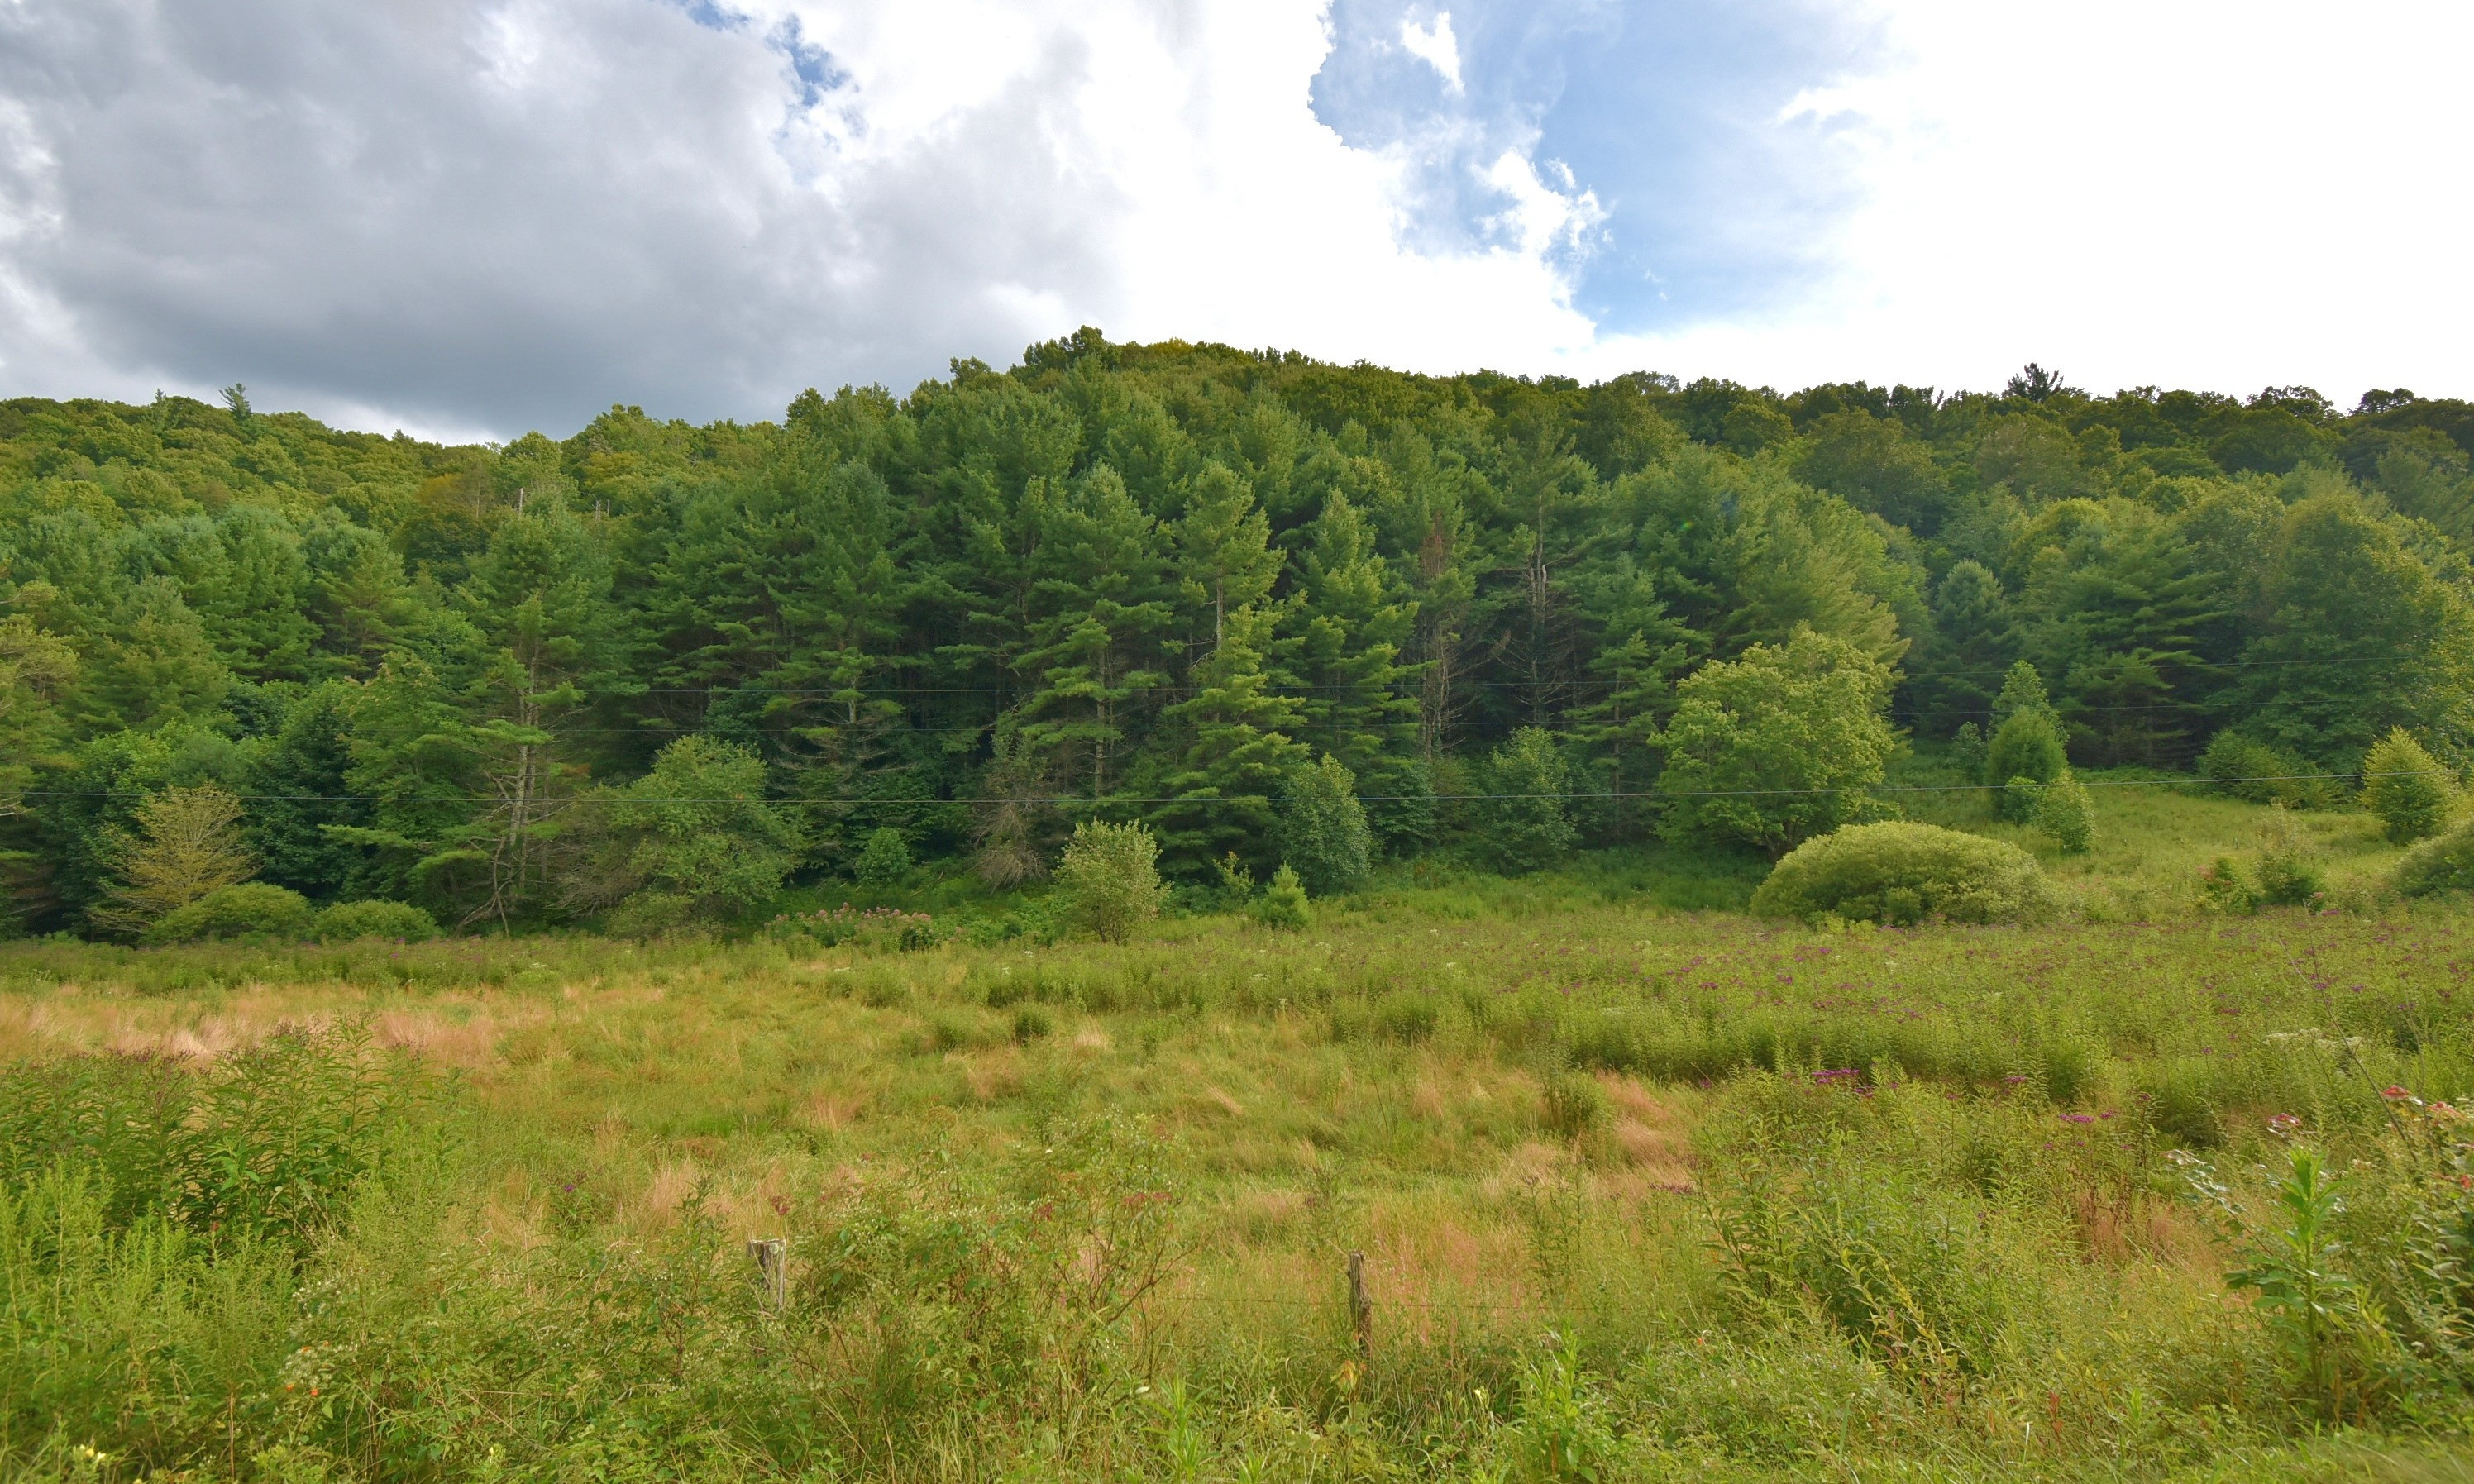 This gorgeous 64.97 acre tract of land is located off of Little Laurel Rd. in the Creston area of Ashe County in the mountains of North Carolina.